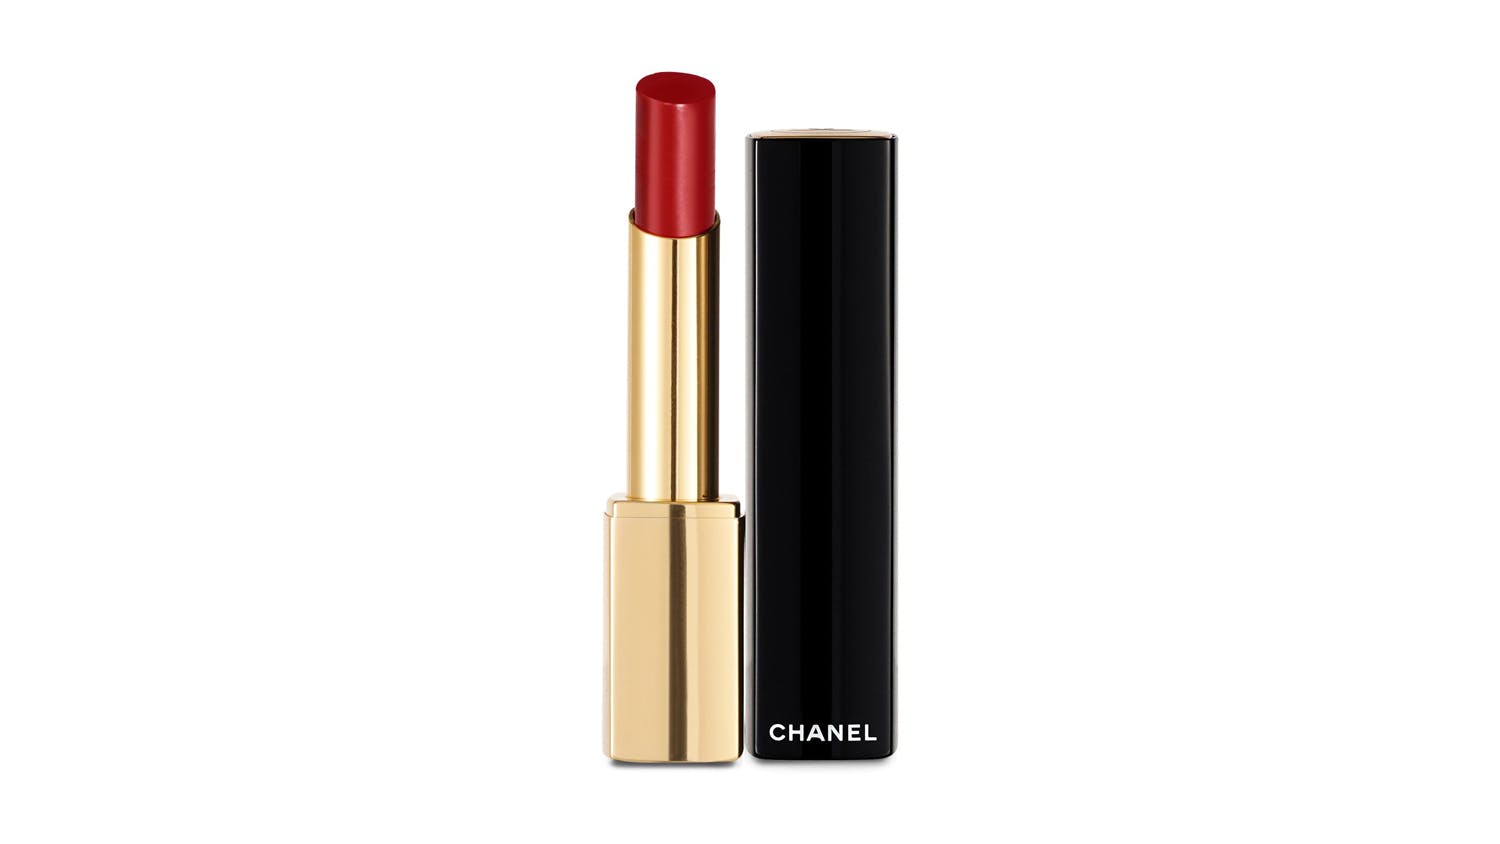 Chanel Rouge Allure L'Extrait Lipstick BNIB, Beauty & Personal Care, Face,  Makeup on Carousell